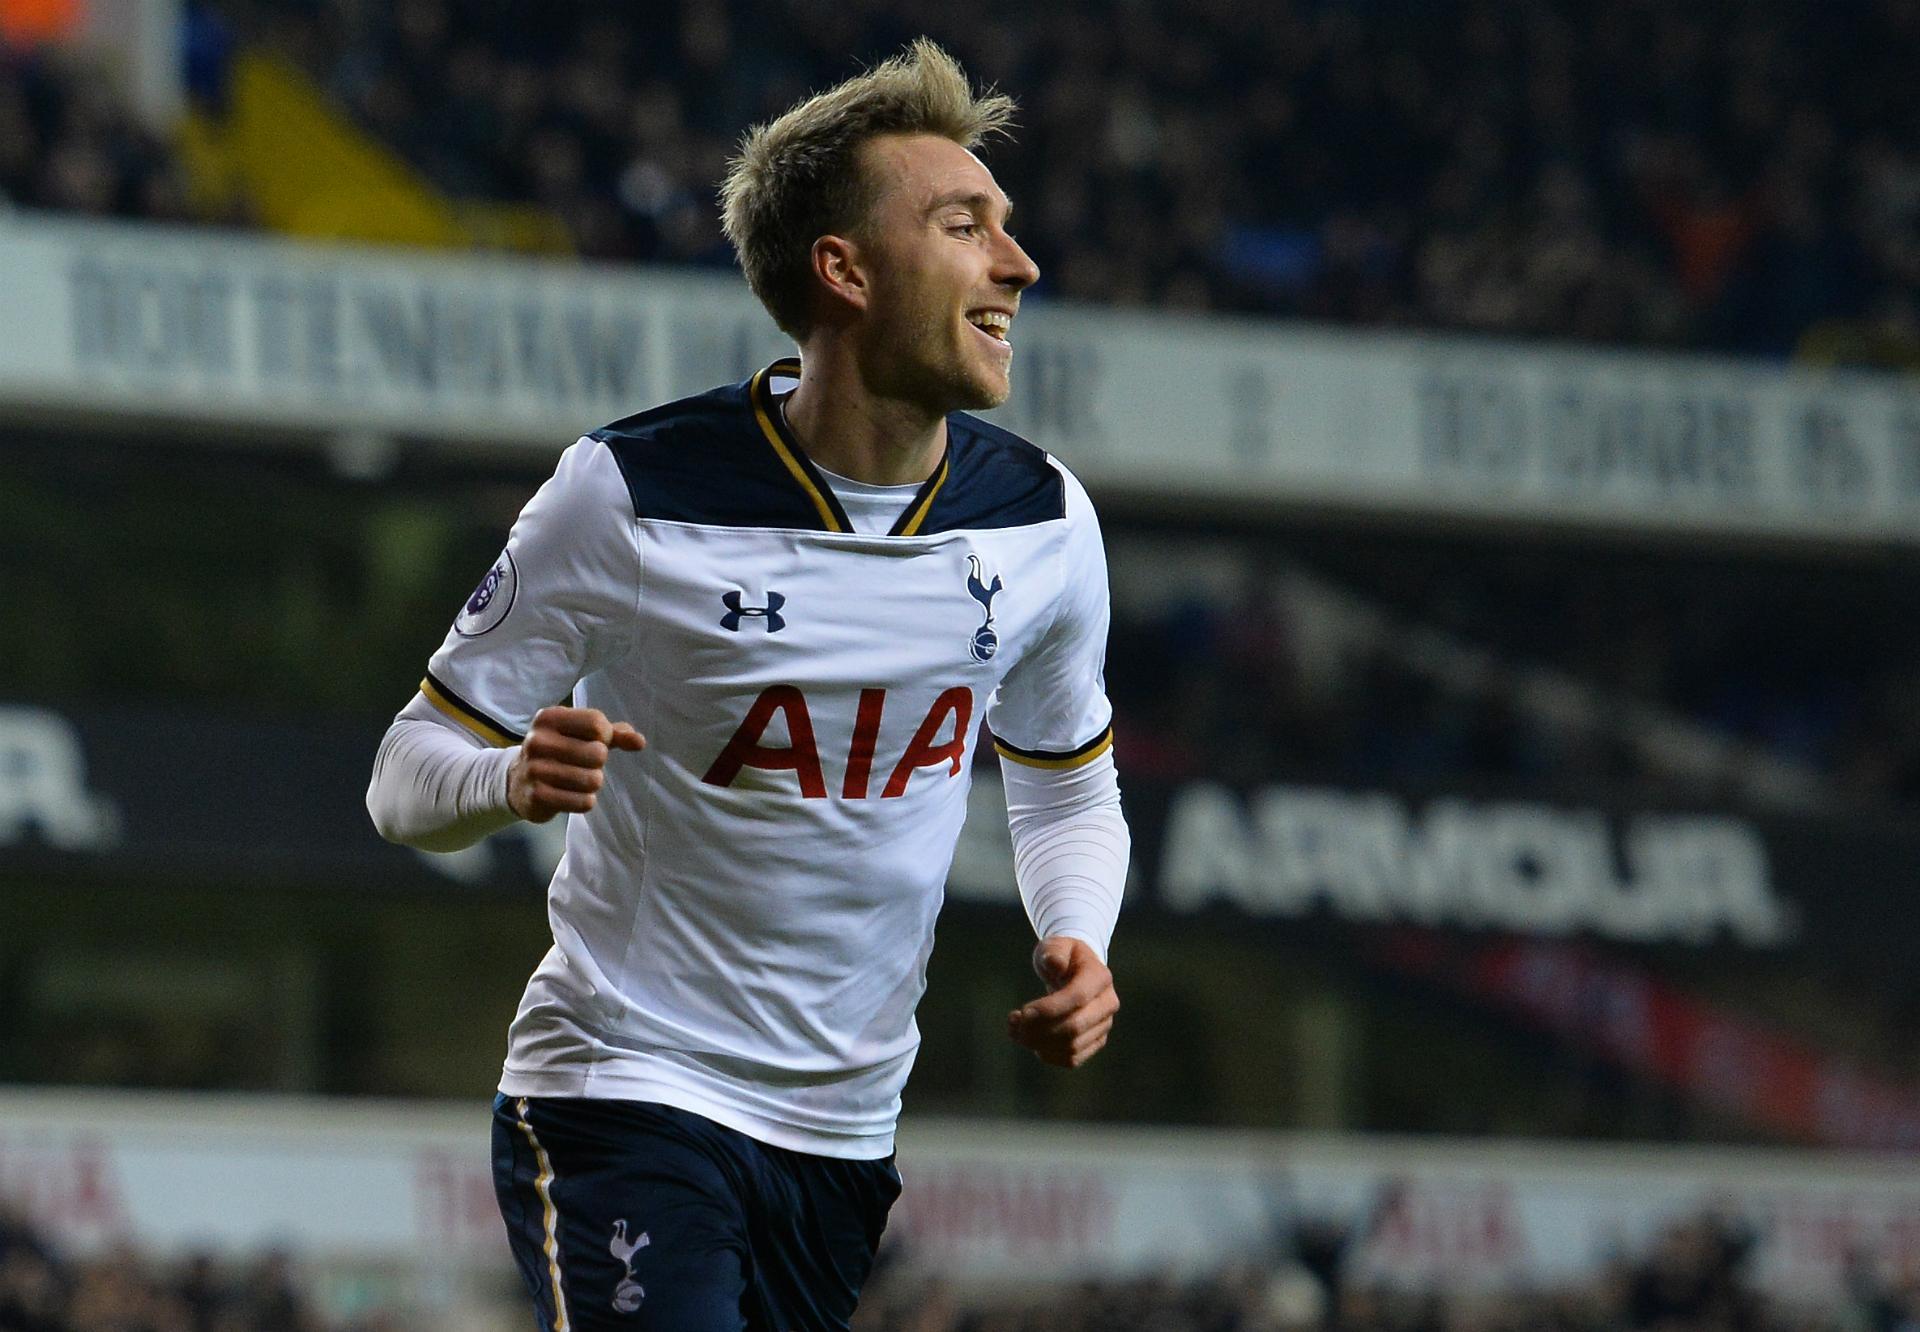 Everyone wants to be part of an exciting future at Tottenham, says